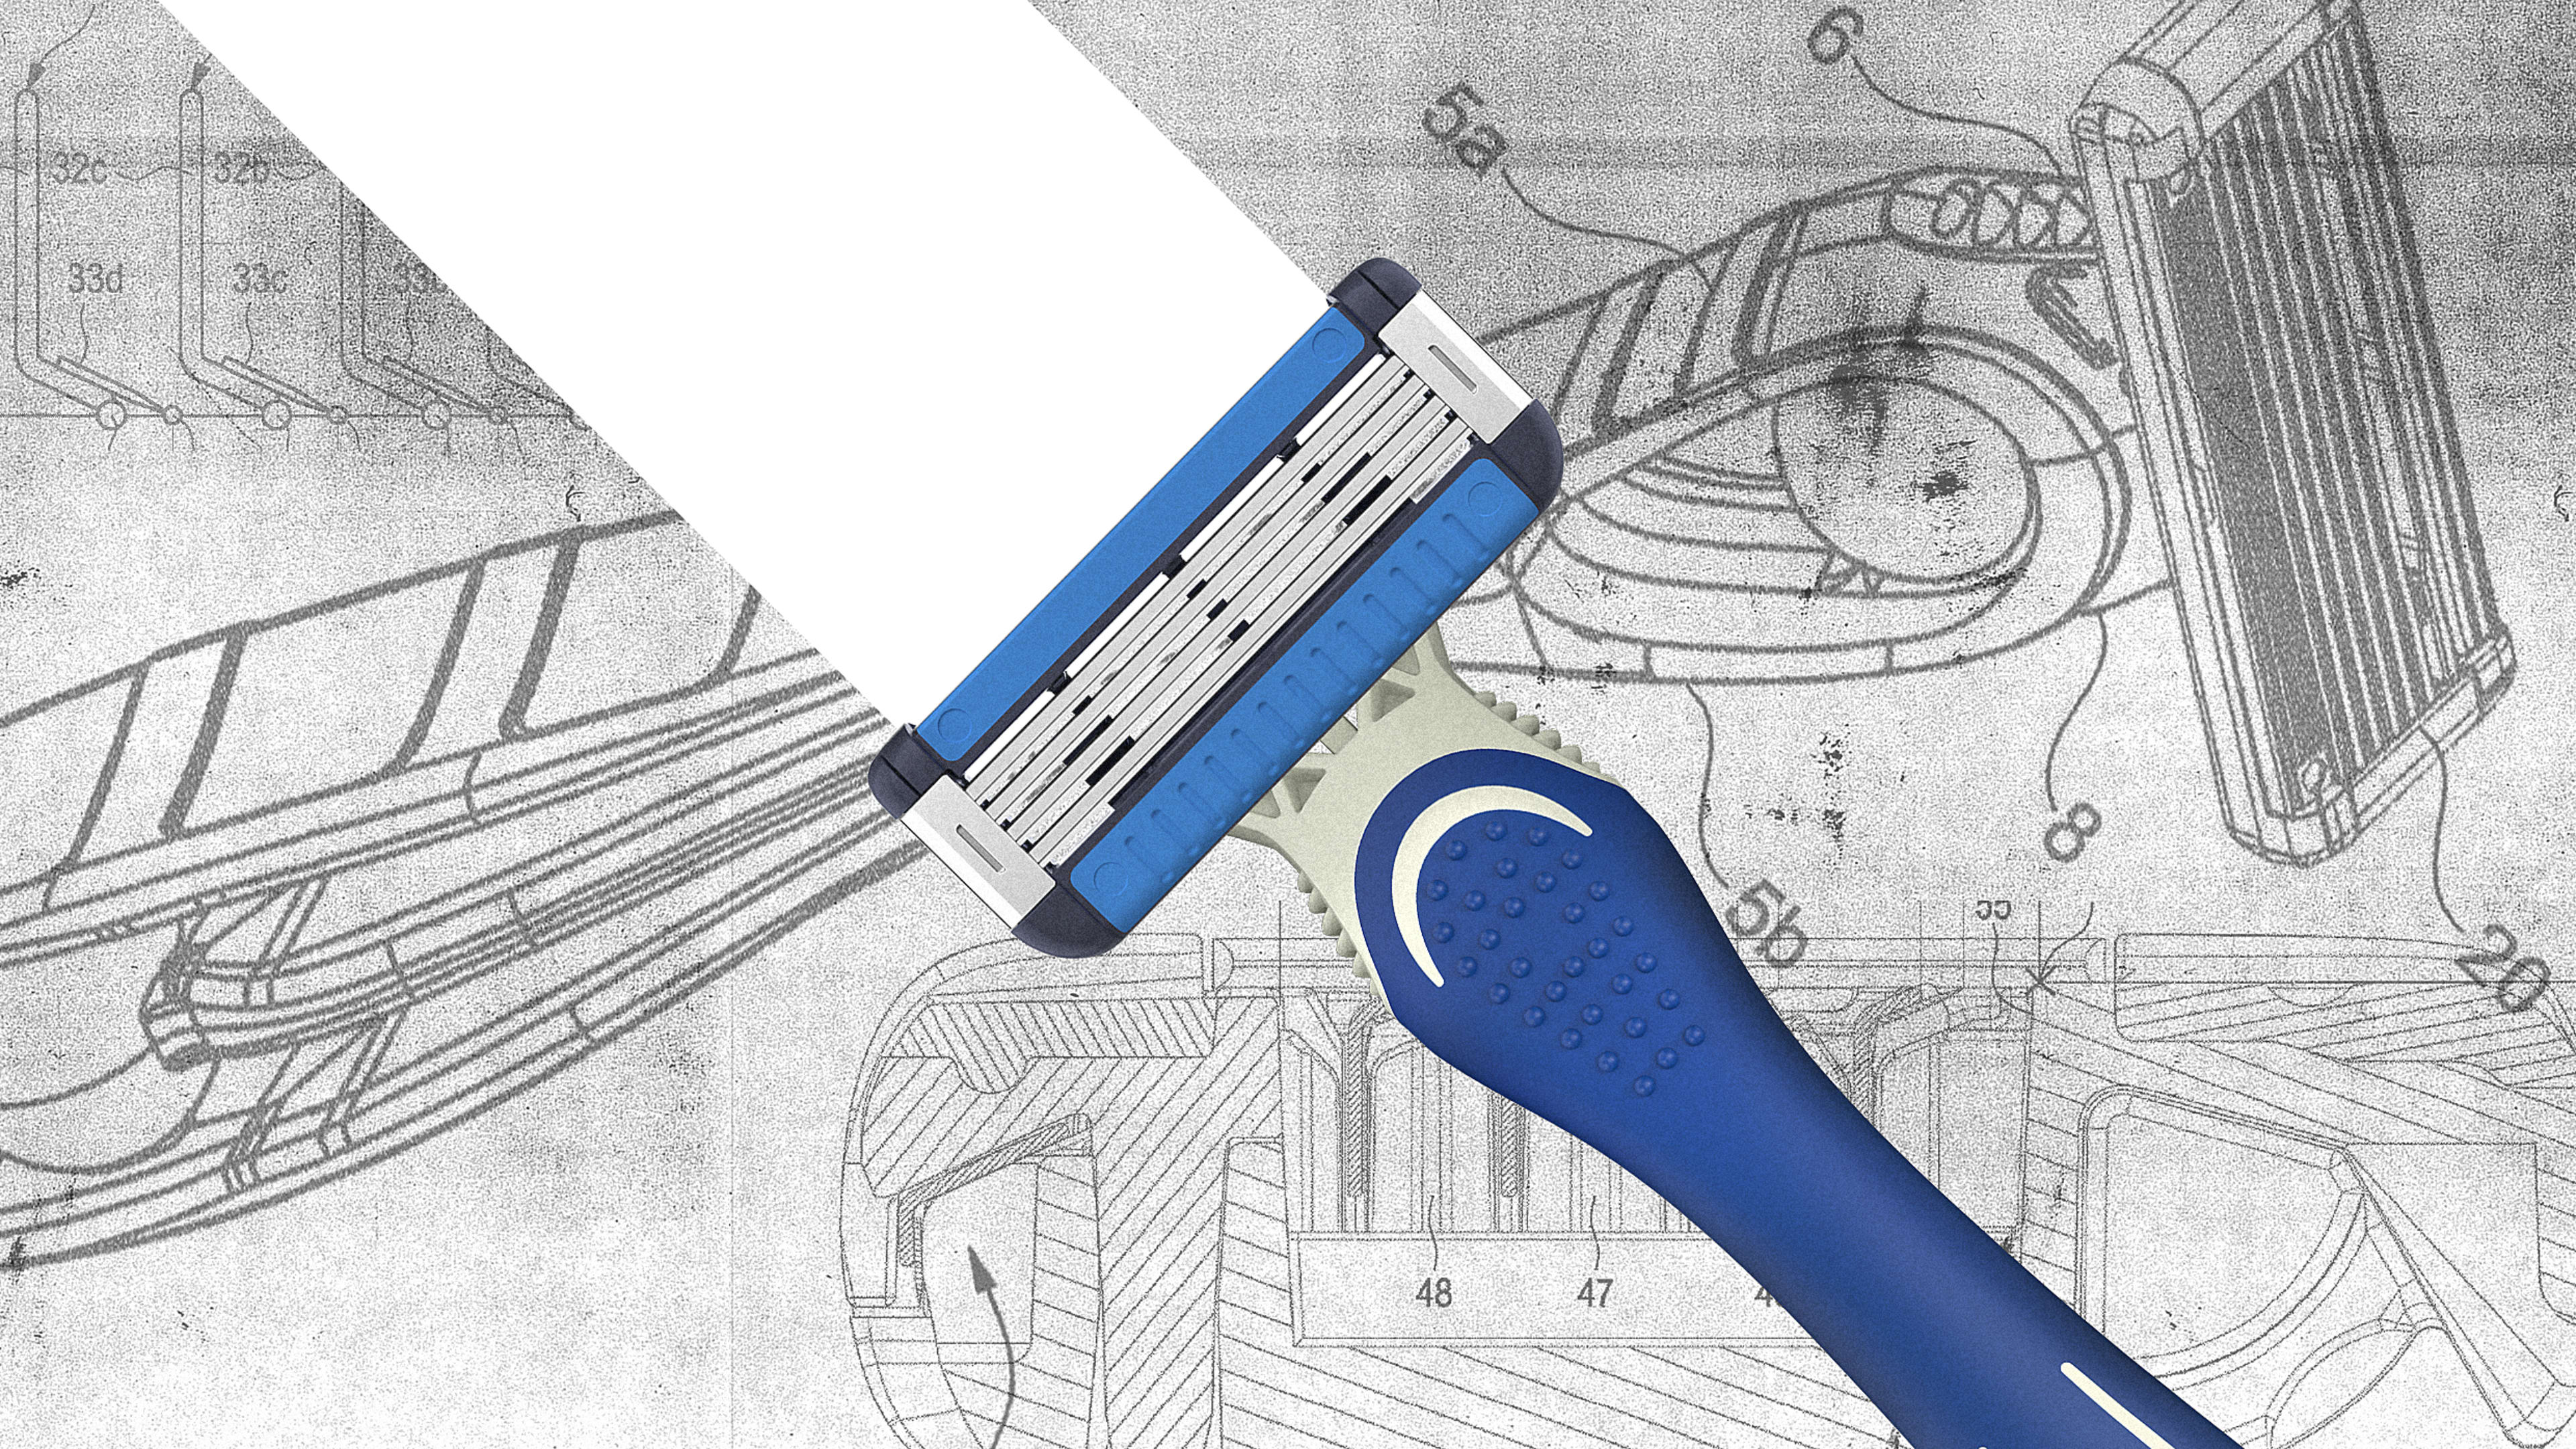 BIC’s new 21-patent razor may have just ended the blade wars